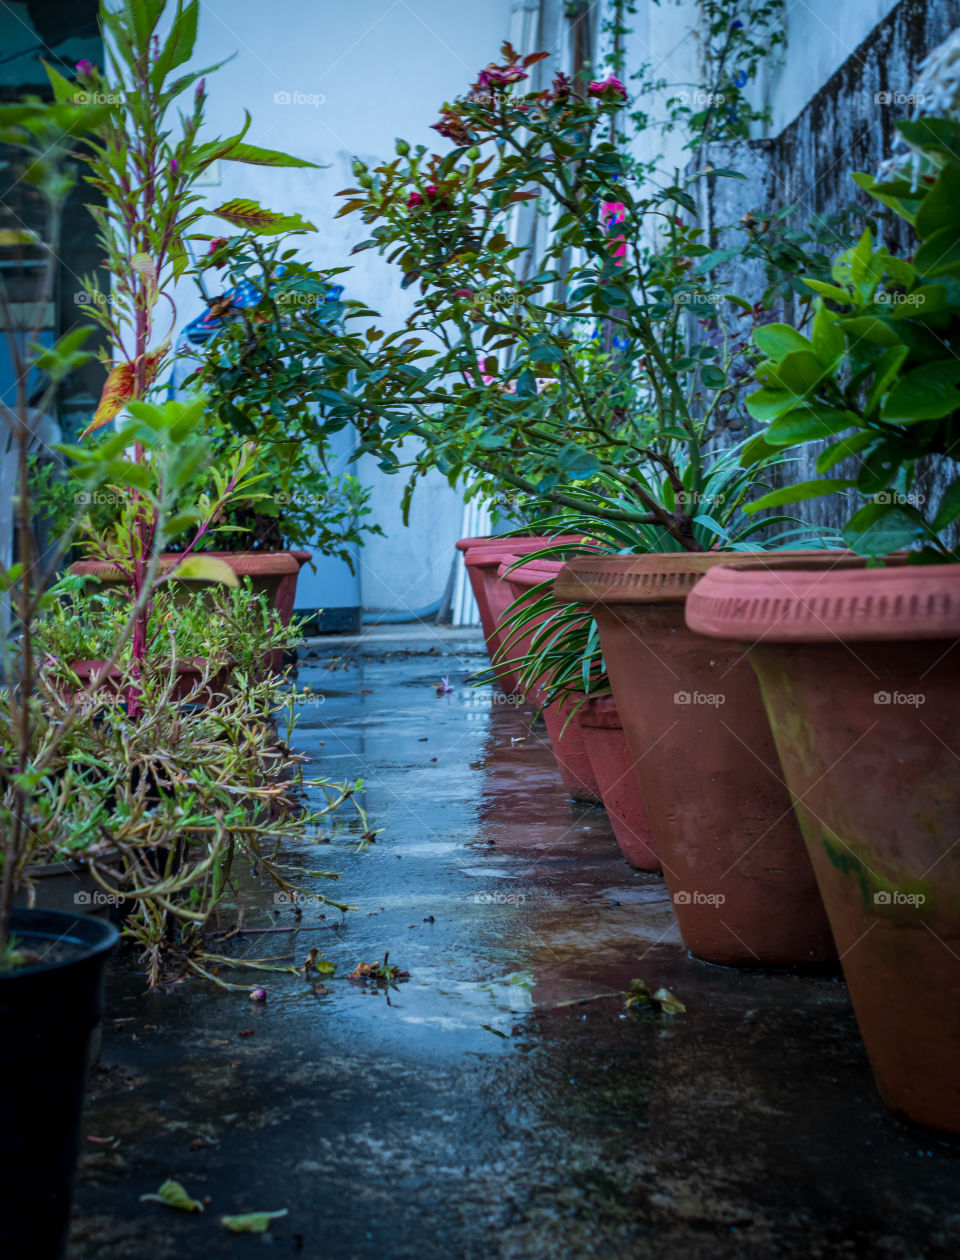 Wet terrace with blooming plants and leaves always reminds me of rainy days